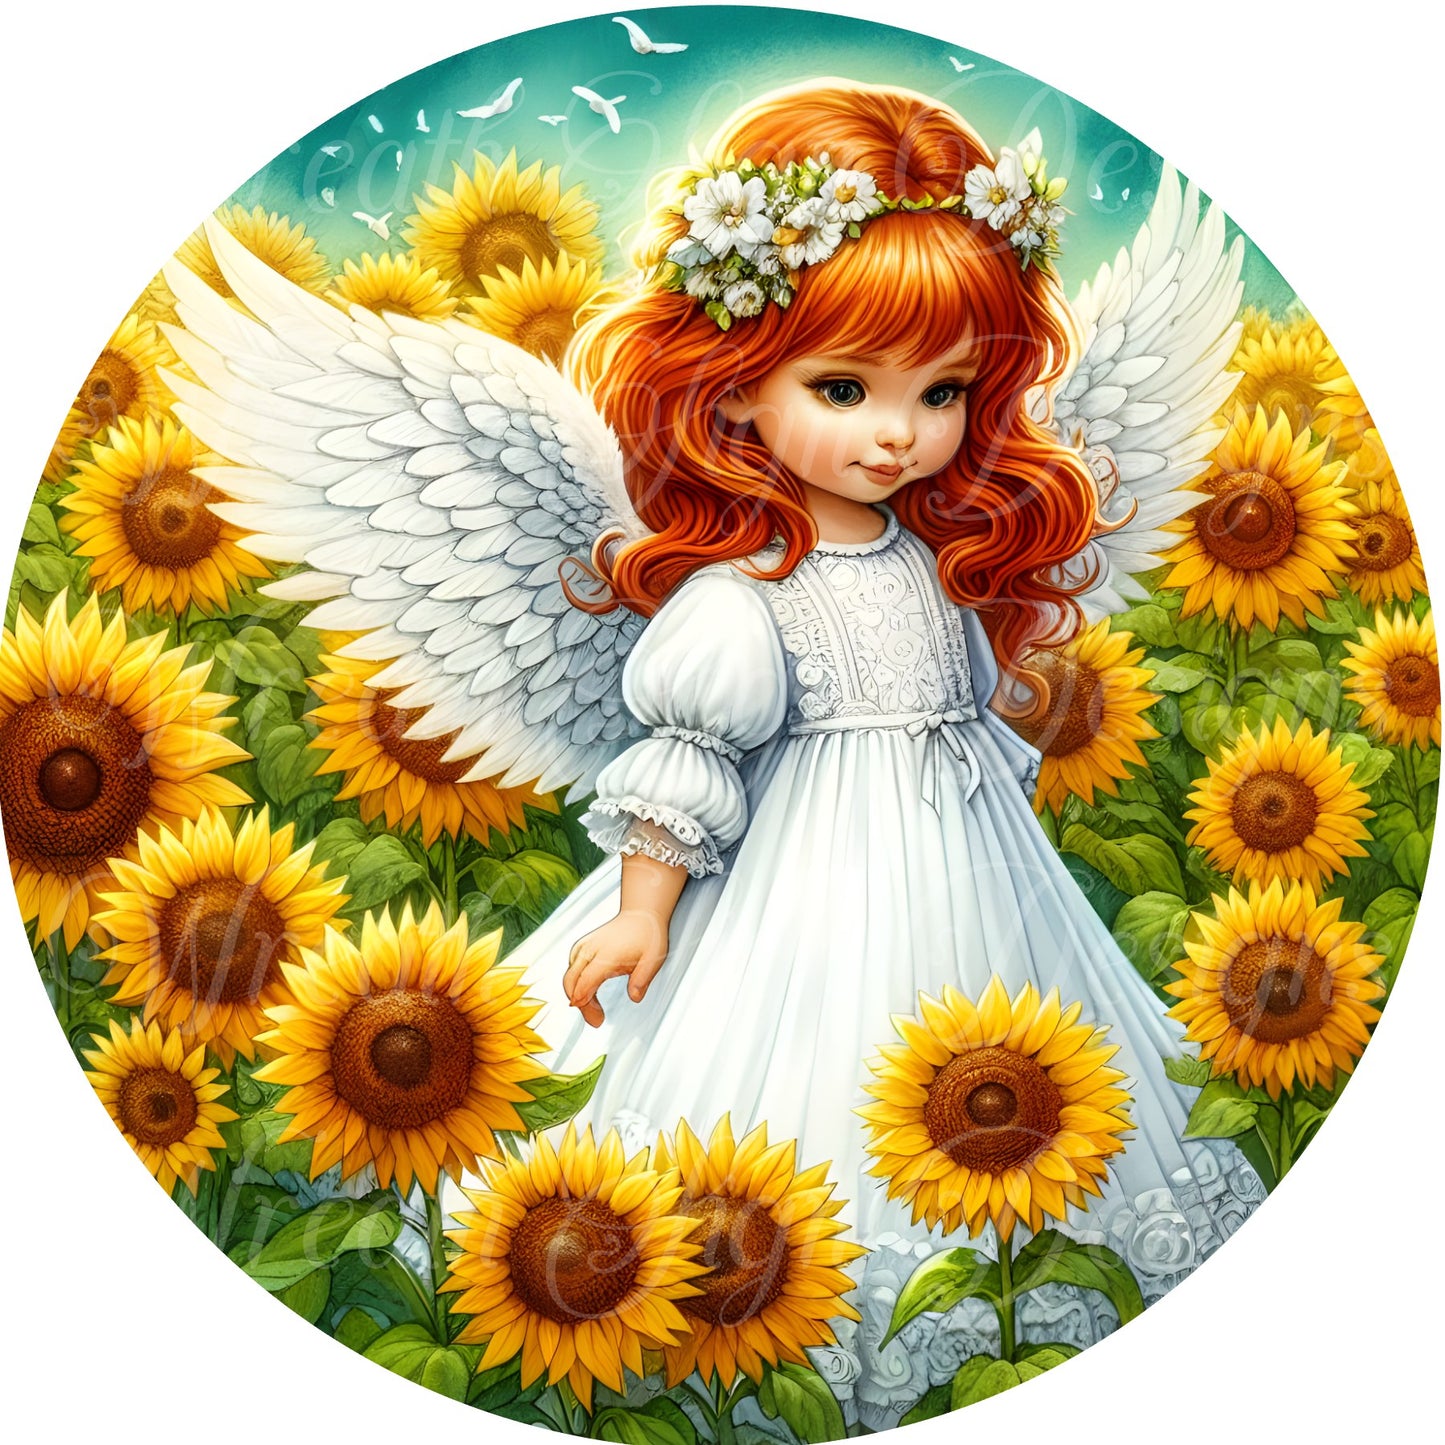 Angel in the sunflowers round metal wreath sign, wreath center, wreath attachment, fall, autumn wreath sign, sunflowers, angels